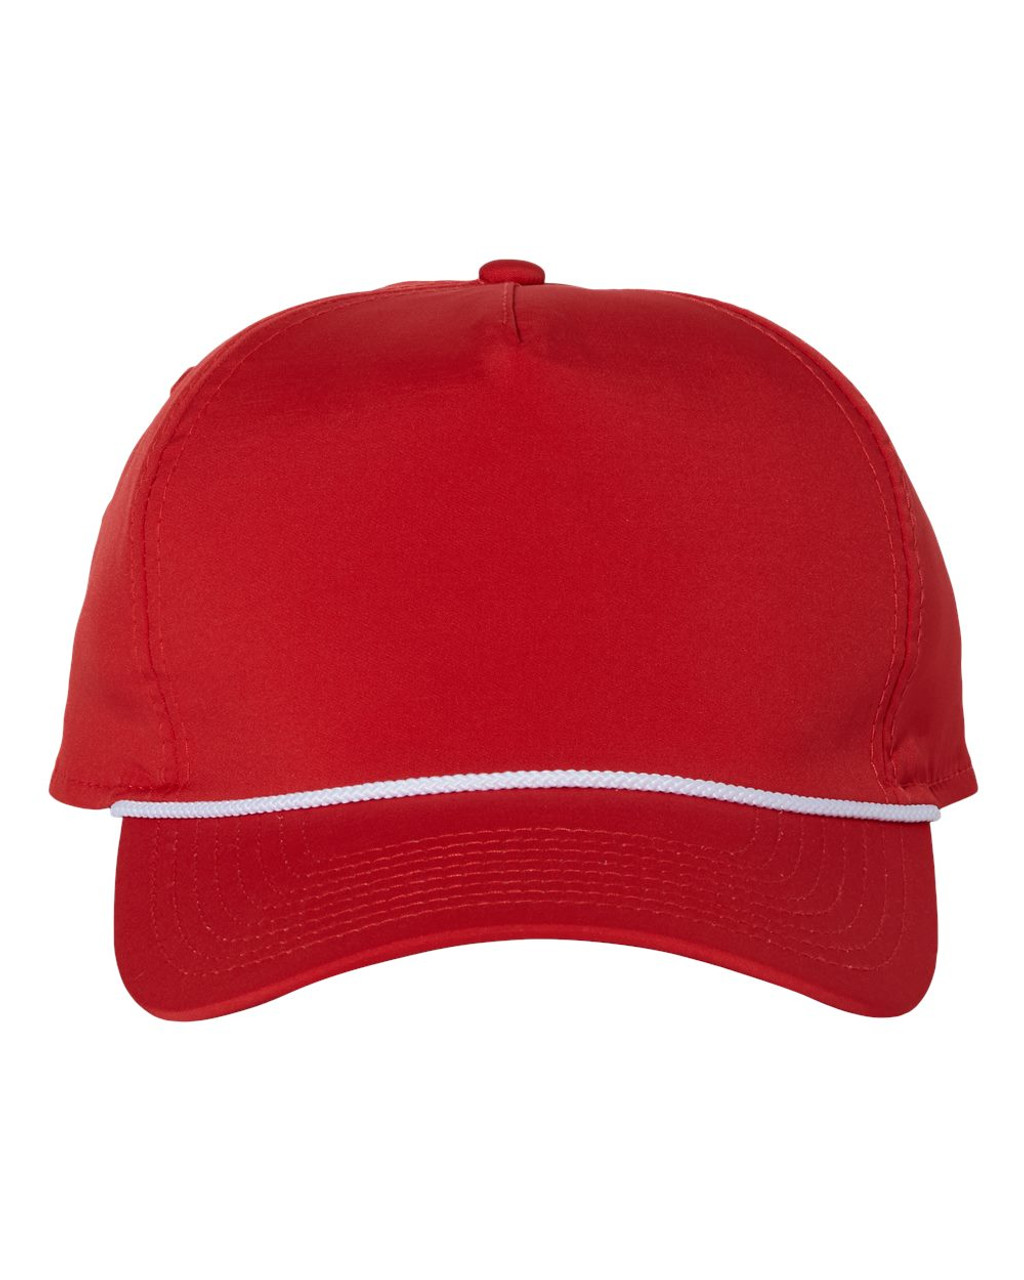 Imperial - The Wrightson Cap - 5054 Red/White